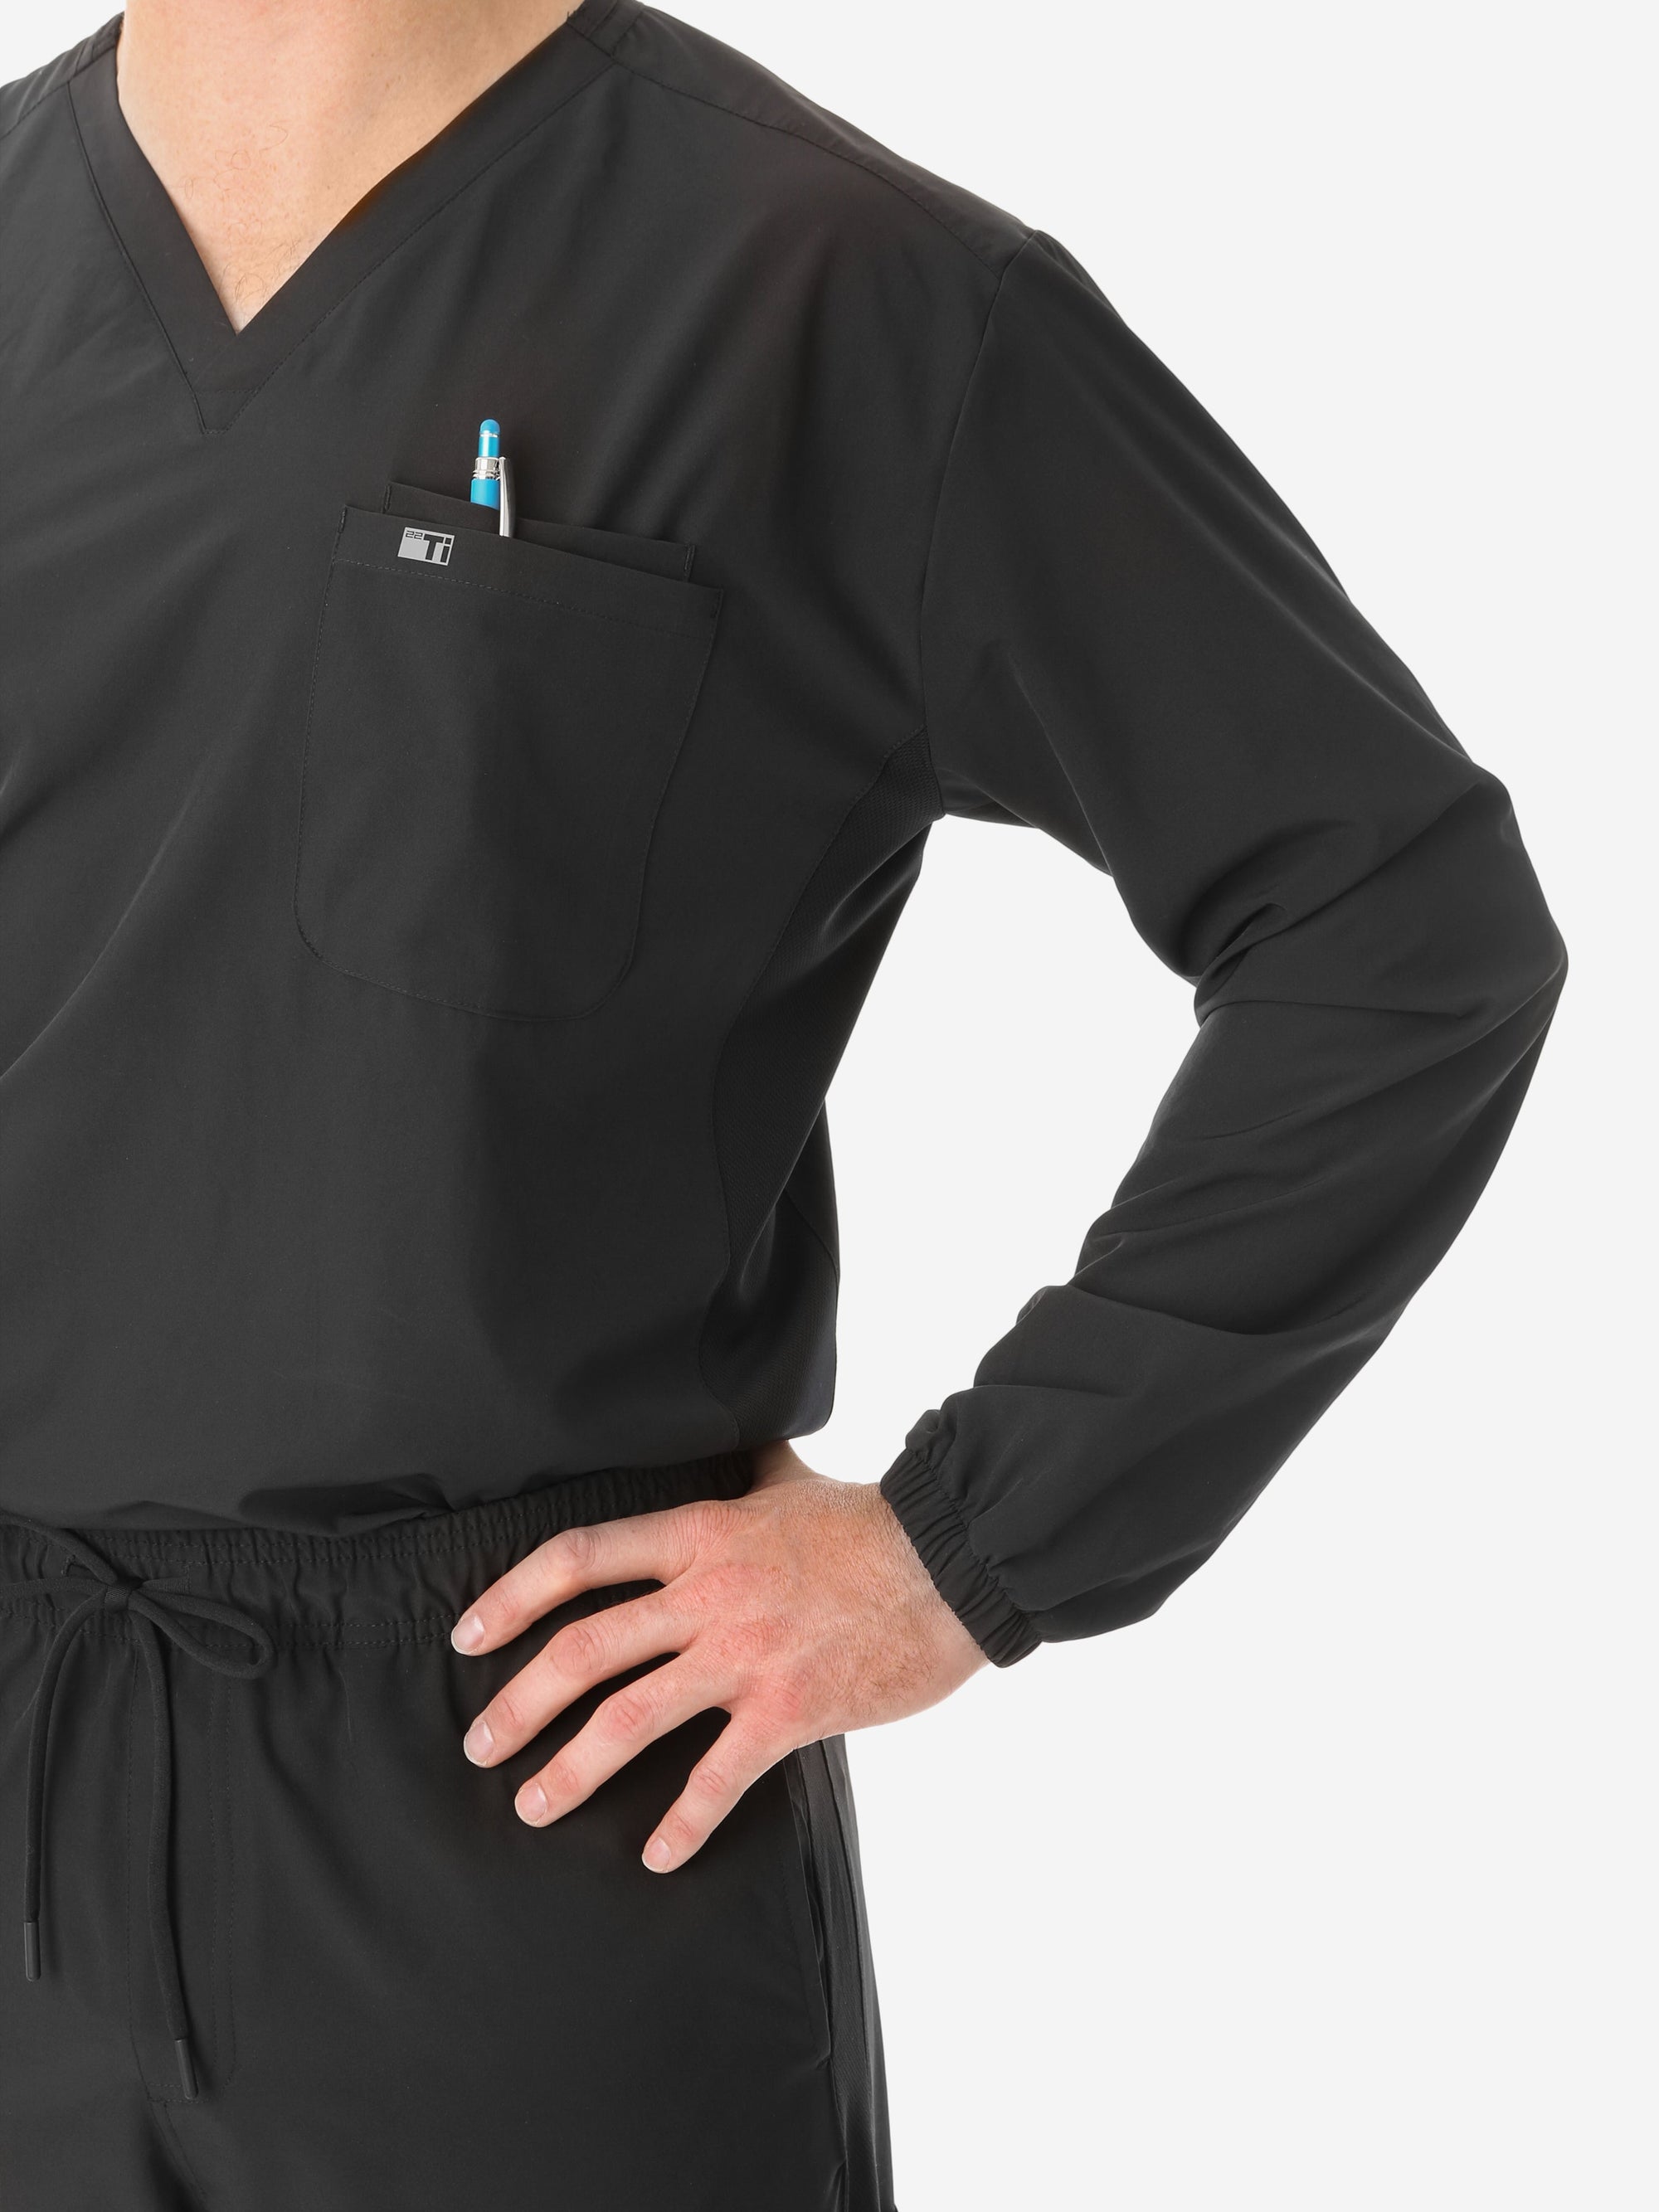 Men&#39;s Long Sleeve Scrub Top with Two Chest Pockets Real Black Front View Pockets Closeup